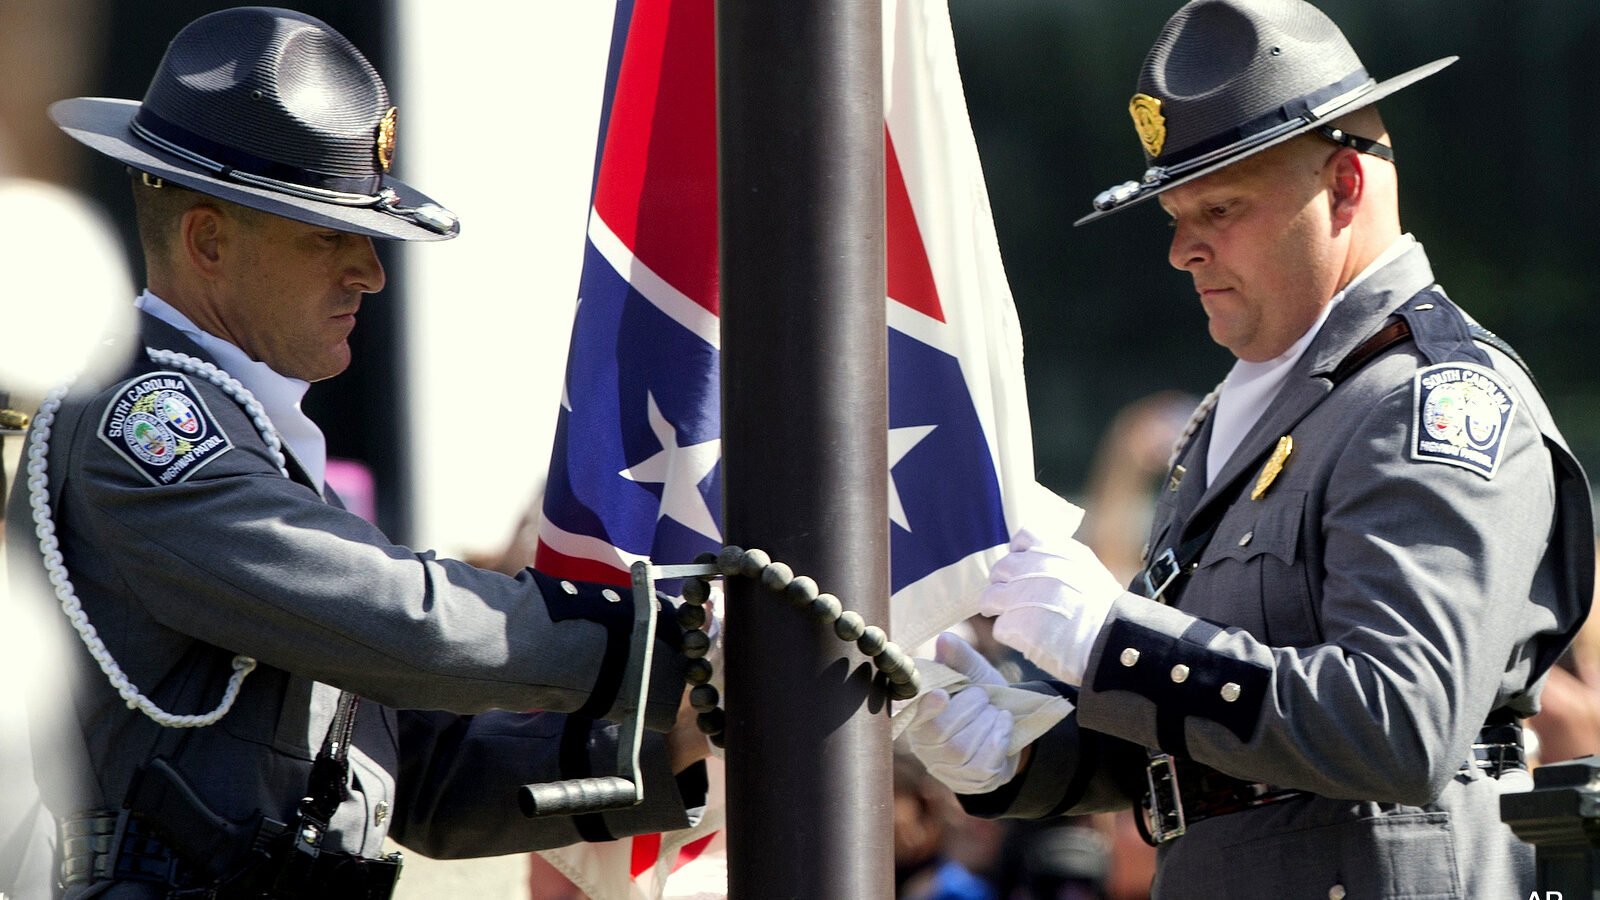 An honor guard from the South Carolina Highway patrol lowers the Confederate battle flag as it is removed from the Capitol grounds Friday